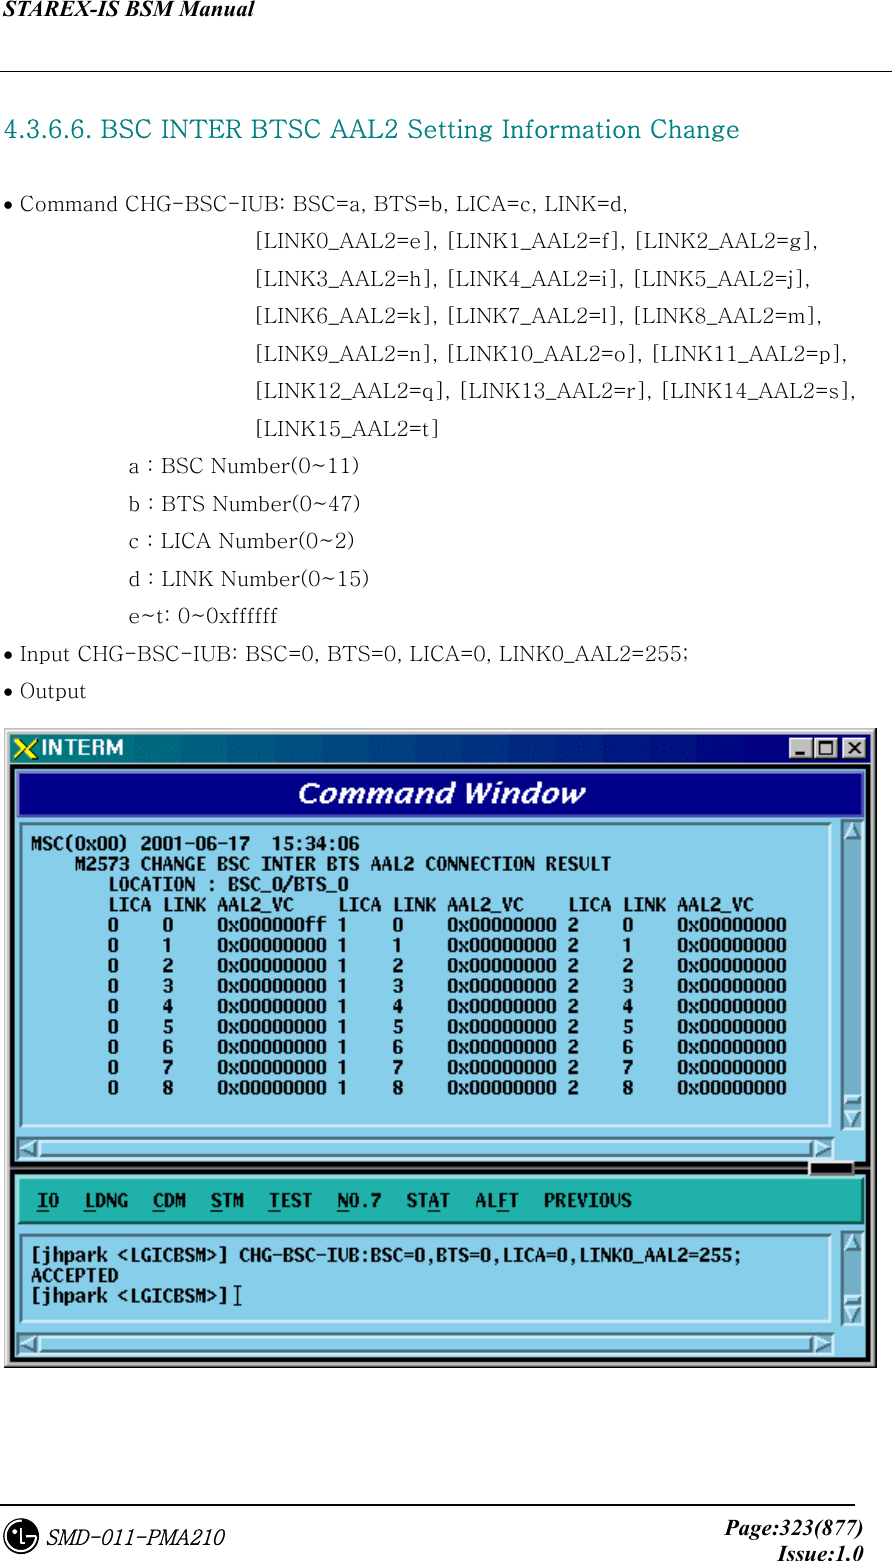 STAREX-IS BSM Manual     Page:323(877)Issue:1.0SMD-011-PMA210  4.3.6.6. BSC INTER BTSC AAL2 Setting Information Change  • Command CHG-BSC-IUB: BSC=a, BTS=b, LICA=c, LINK=d,   [LINK0_AAL2=e], [LINK1_AAL2=f], [LINK2_AAL2=g],         [LINK3_AAL2=h], [LINK4_AAL2=i], [LINK5_AAL2=j],         [LINK6_AAL2=k], [LINK7_AAL2=l], [LINK8_AAL2=m],         [LINK9_AAL2=n], [LINK10_AAL2=o], [LINK11_AAL2=p],         [LINK12_AAL2=q], [LINK13_AAL2=r], [LINK14_AAL2=s],         [LINK15_AAL2=t]     a : BSC Number(0~11) b : BTS Number(0~47) c : LICA Number(0~2) d : LINK Number(0~15) e~t: 0~0xffffff • Input CHG-BSC-IUB: BSC=0, BTS=0, LICA=0, LINK0_AAL2=255; • Output   